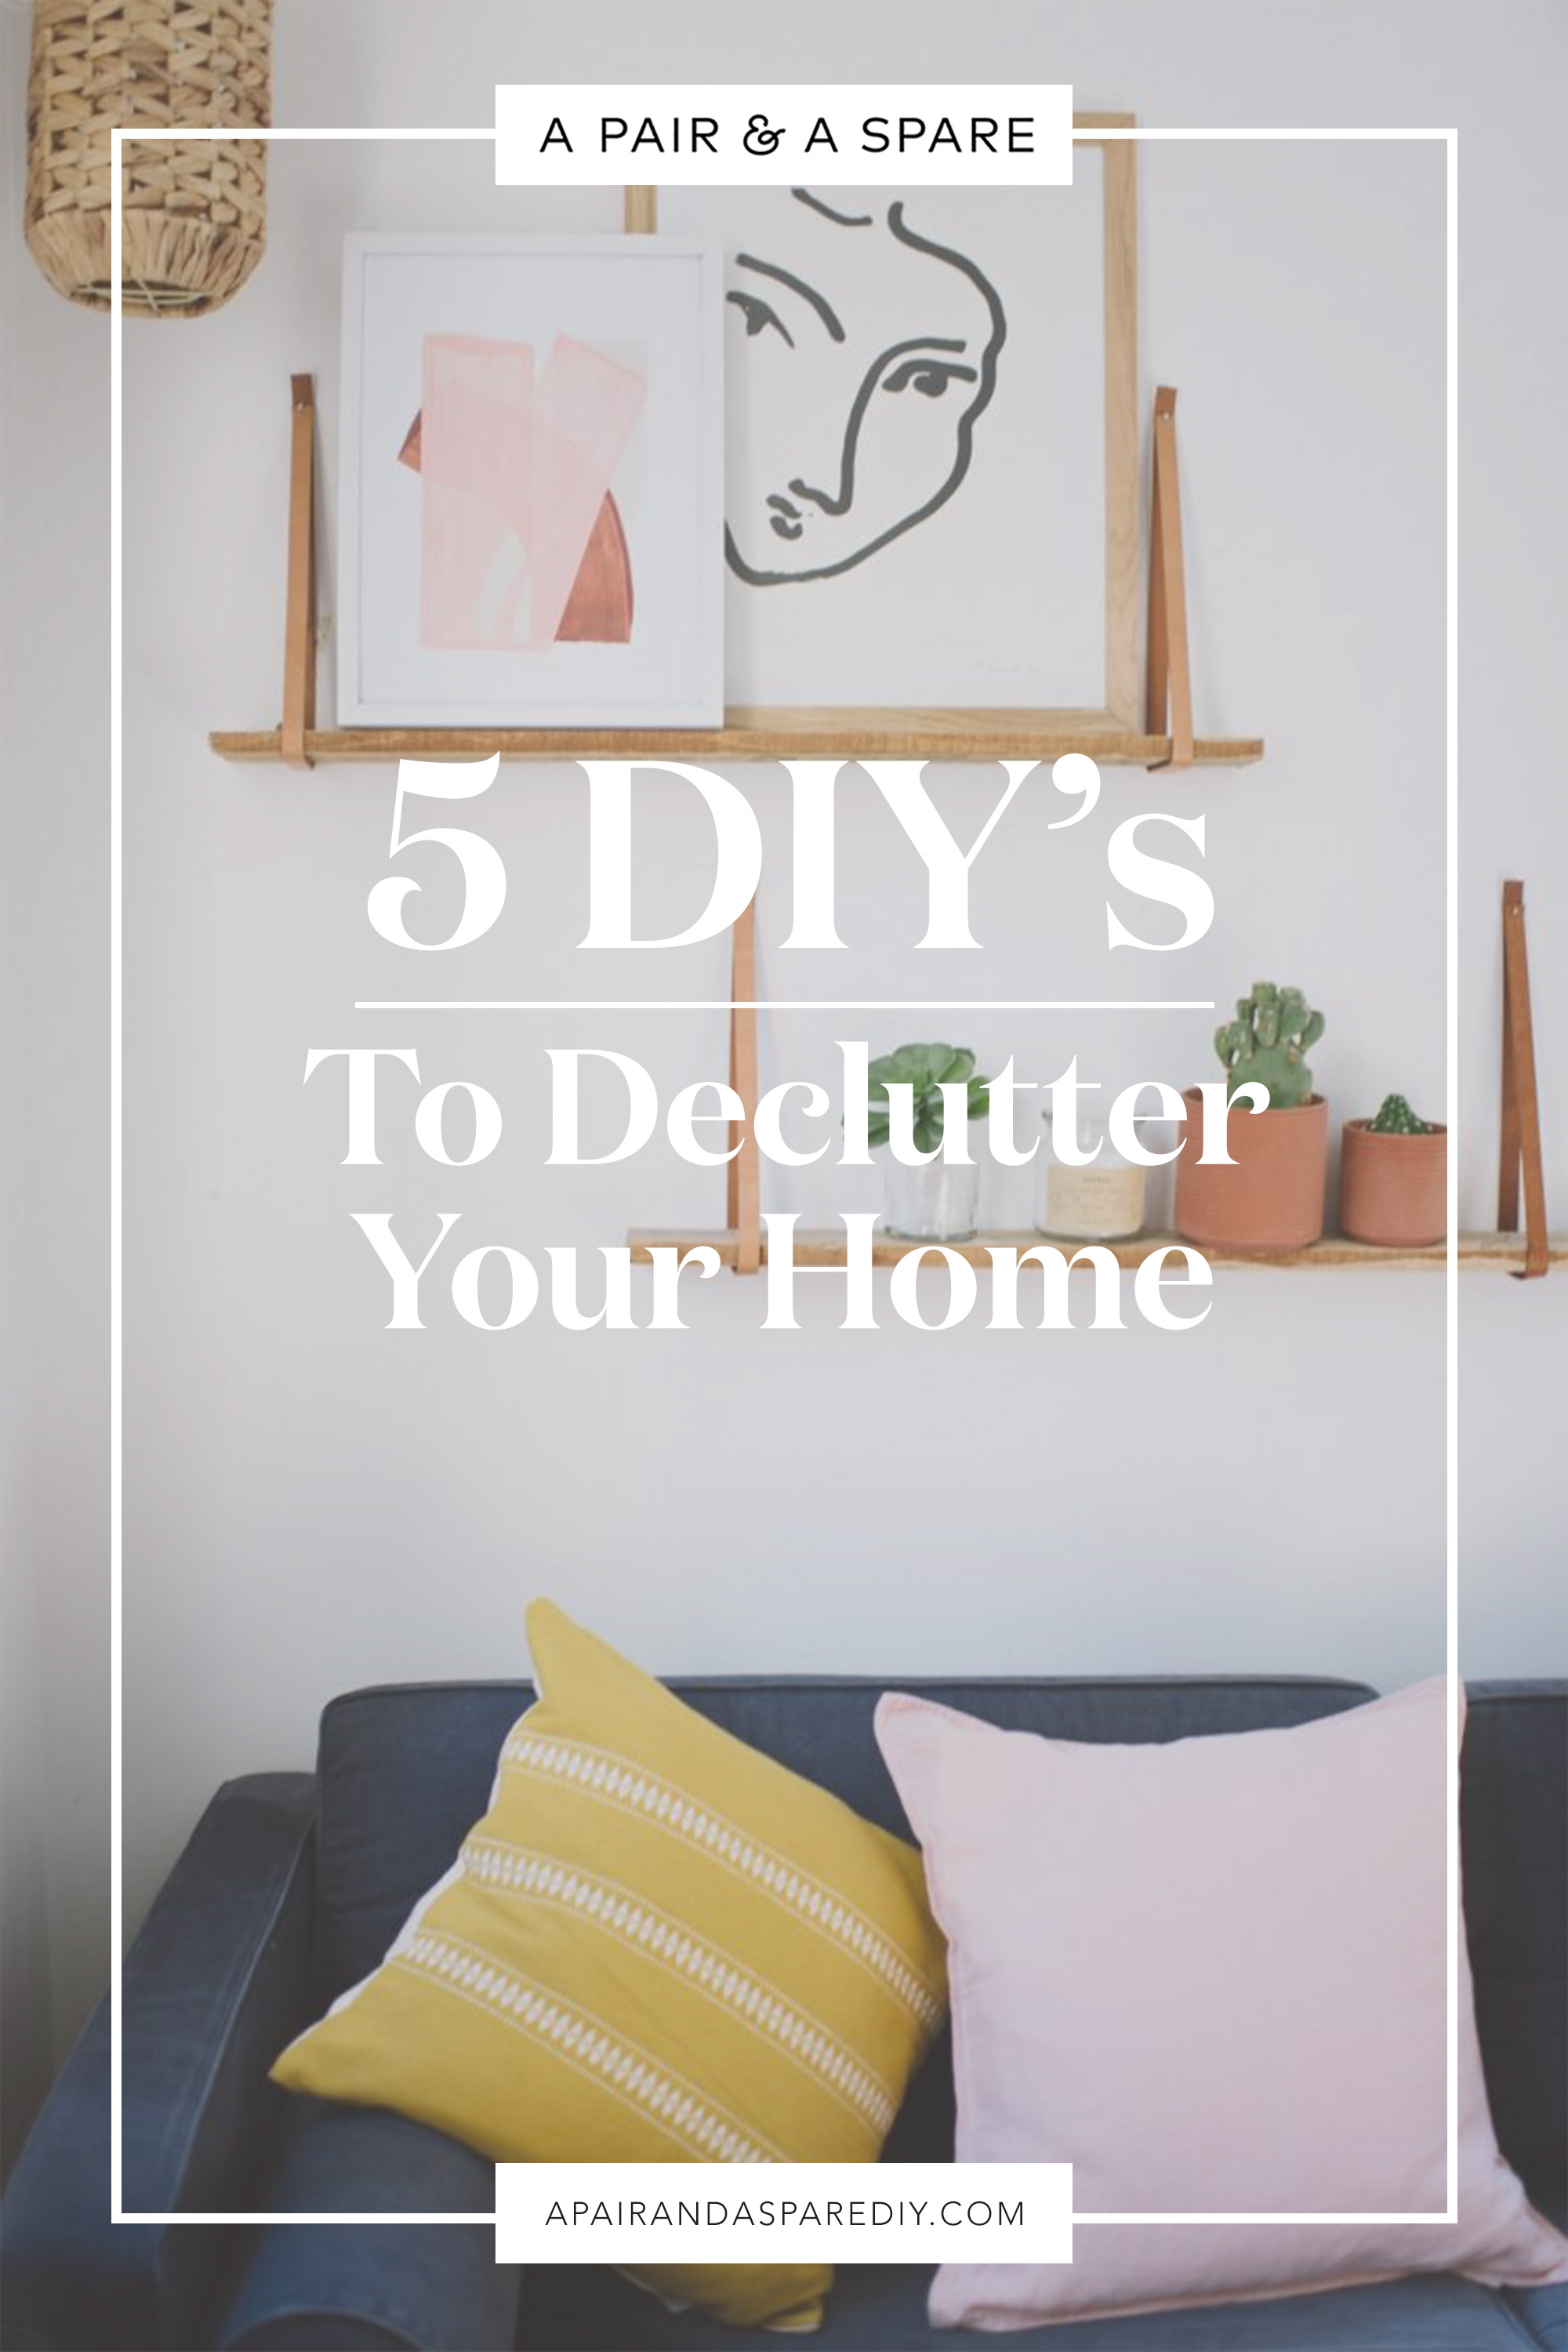 DIY's to Declutter Your Home